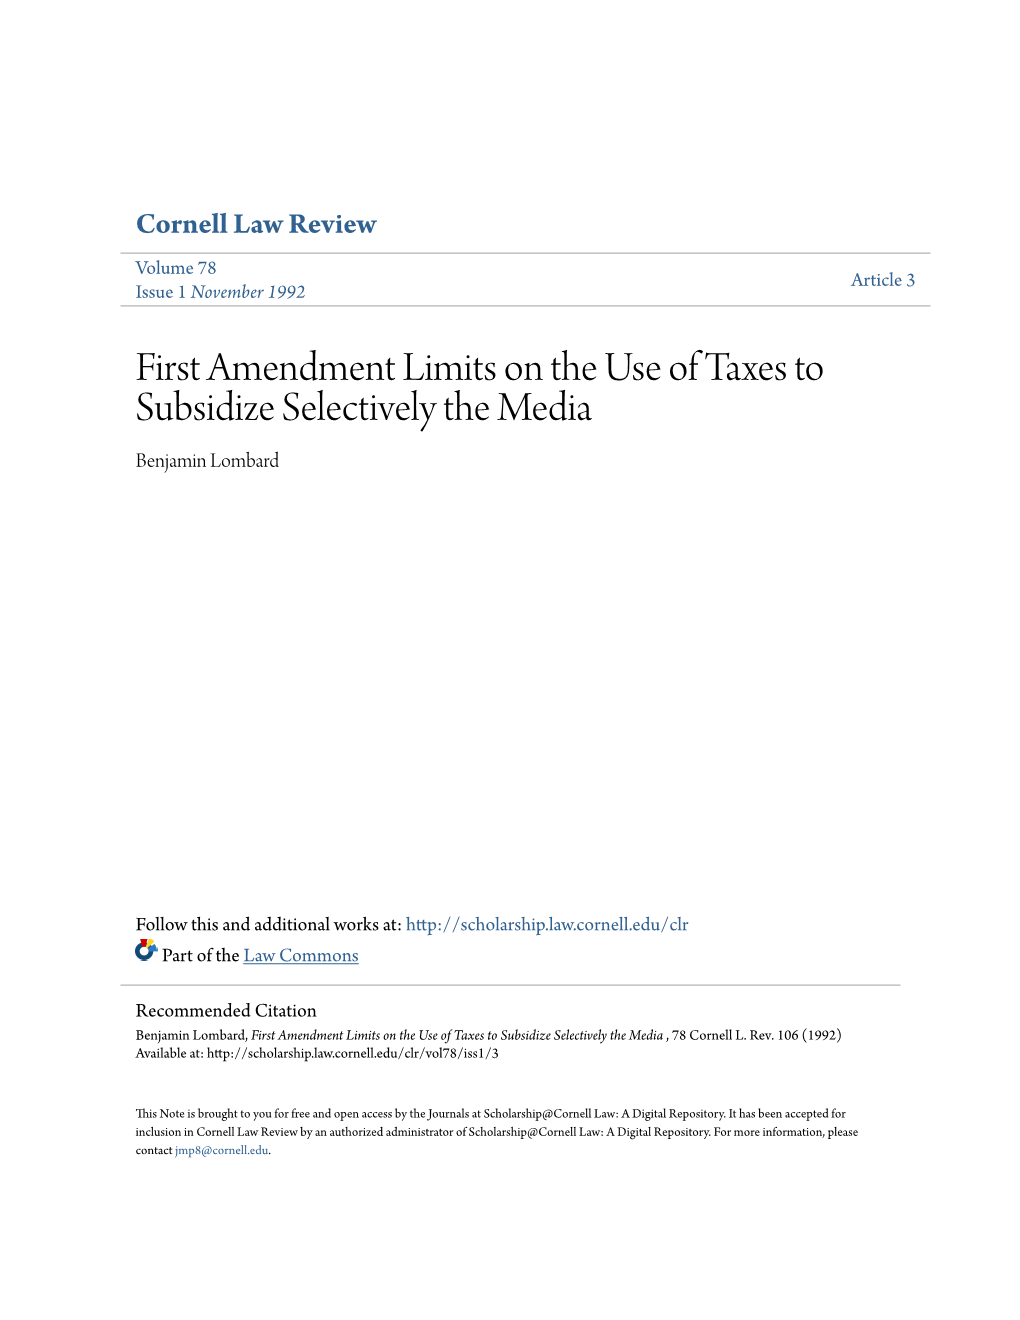 First Amendment Limits on the Use of Taxes to Subsidize Selectively the Media Benjamin Lombard